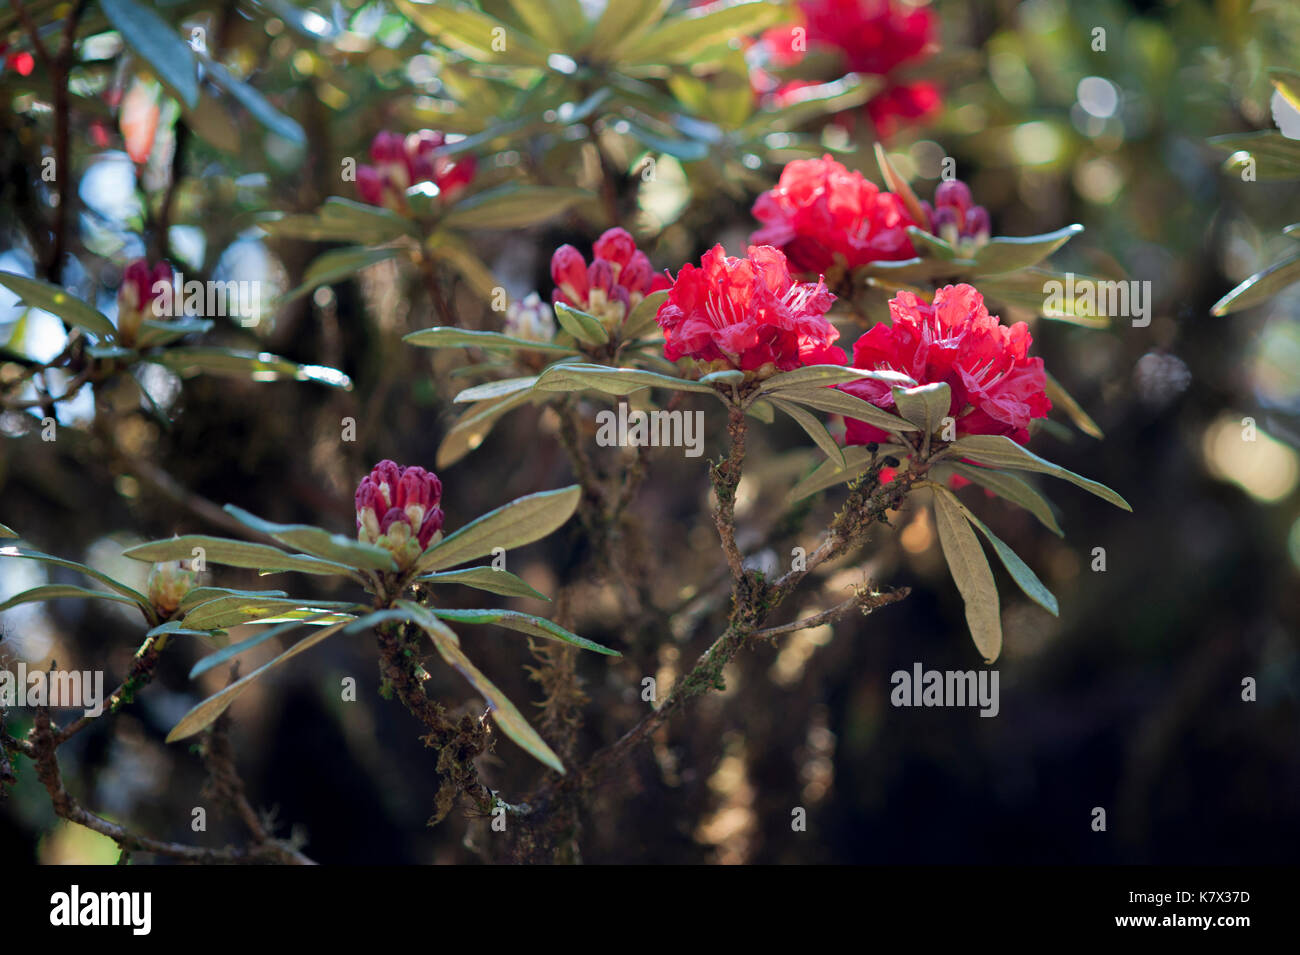 Red Azalea (Rhododendron arboreum subsp. delavayi) growing in a highland forest on Doi Inthanon, the highest mountain in Thailand. Stock Photo